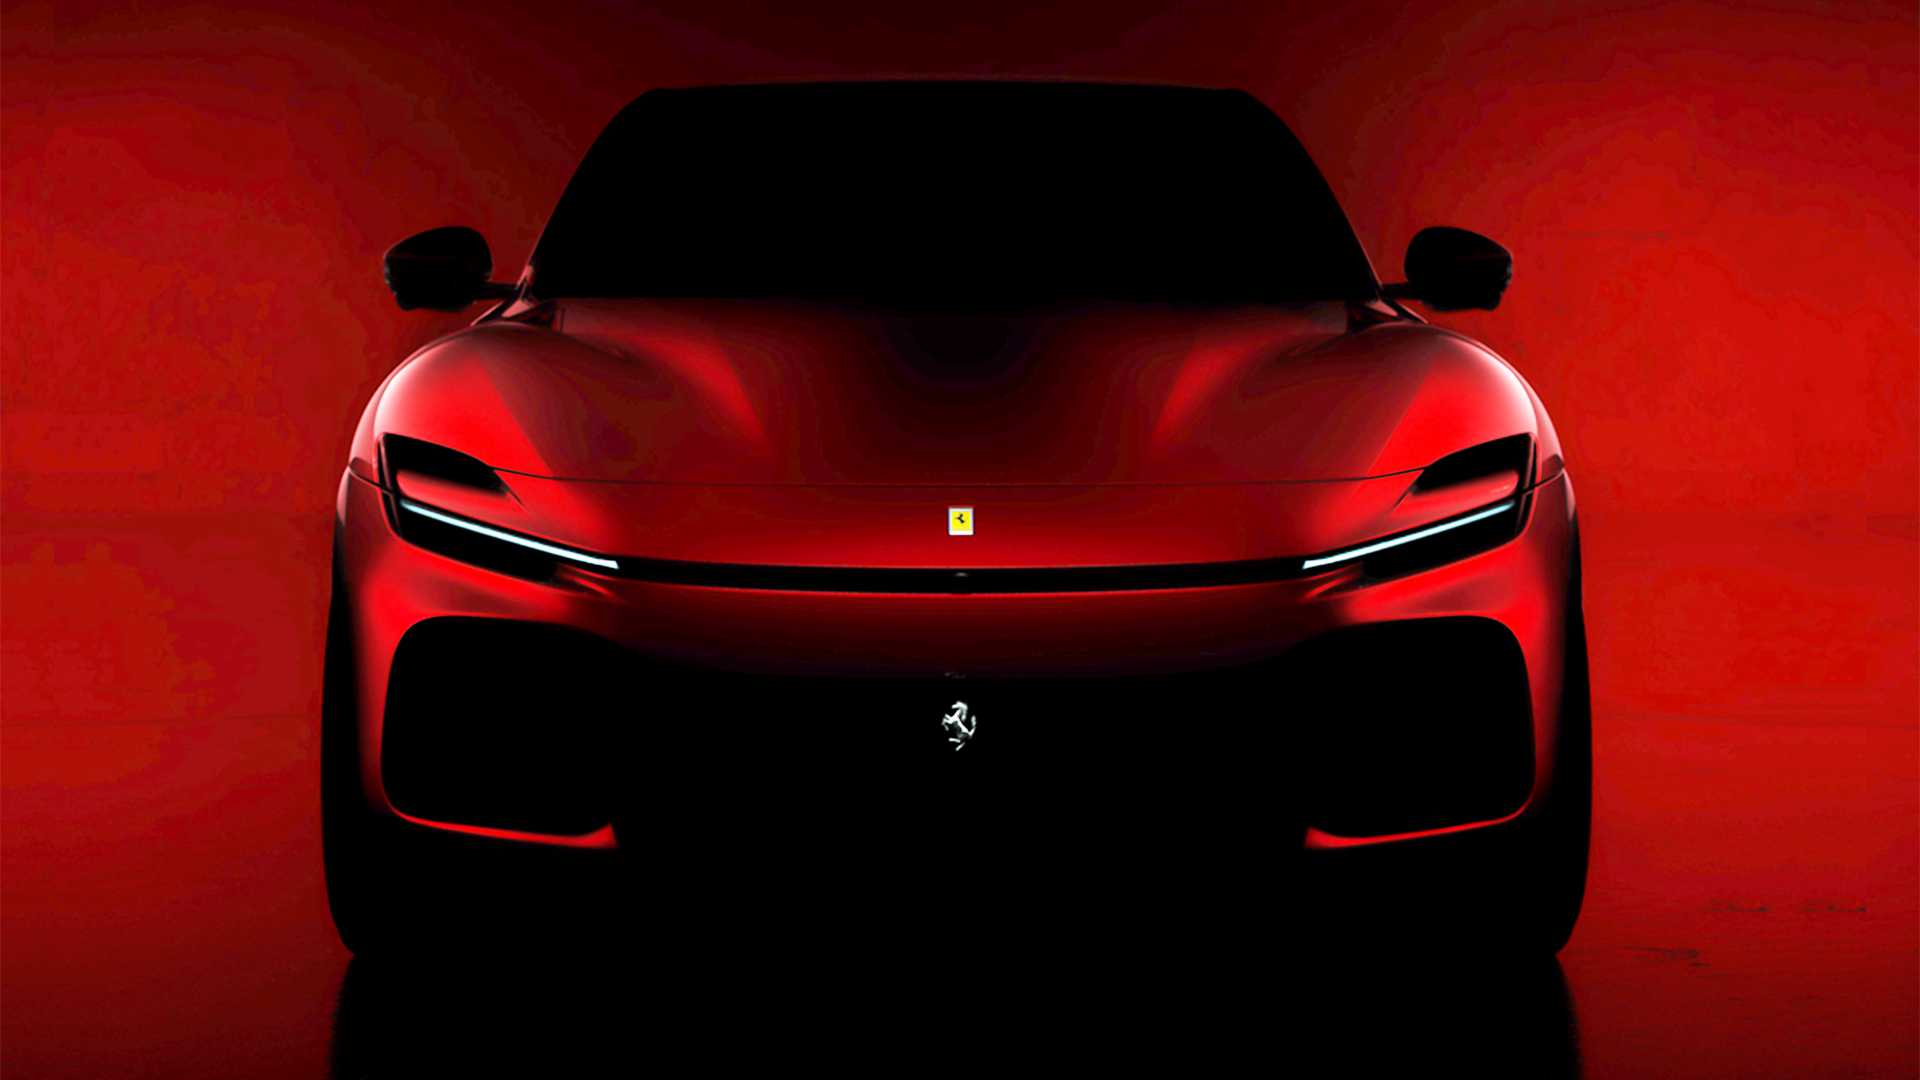 Ferrari Purosangue Suv To Have Limited Availability Just Like The